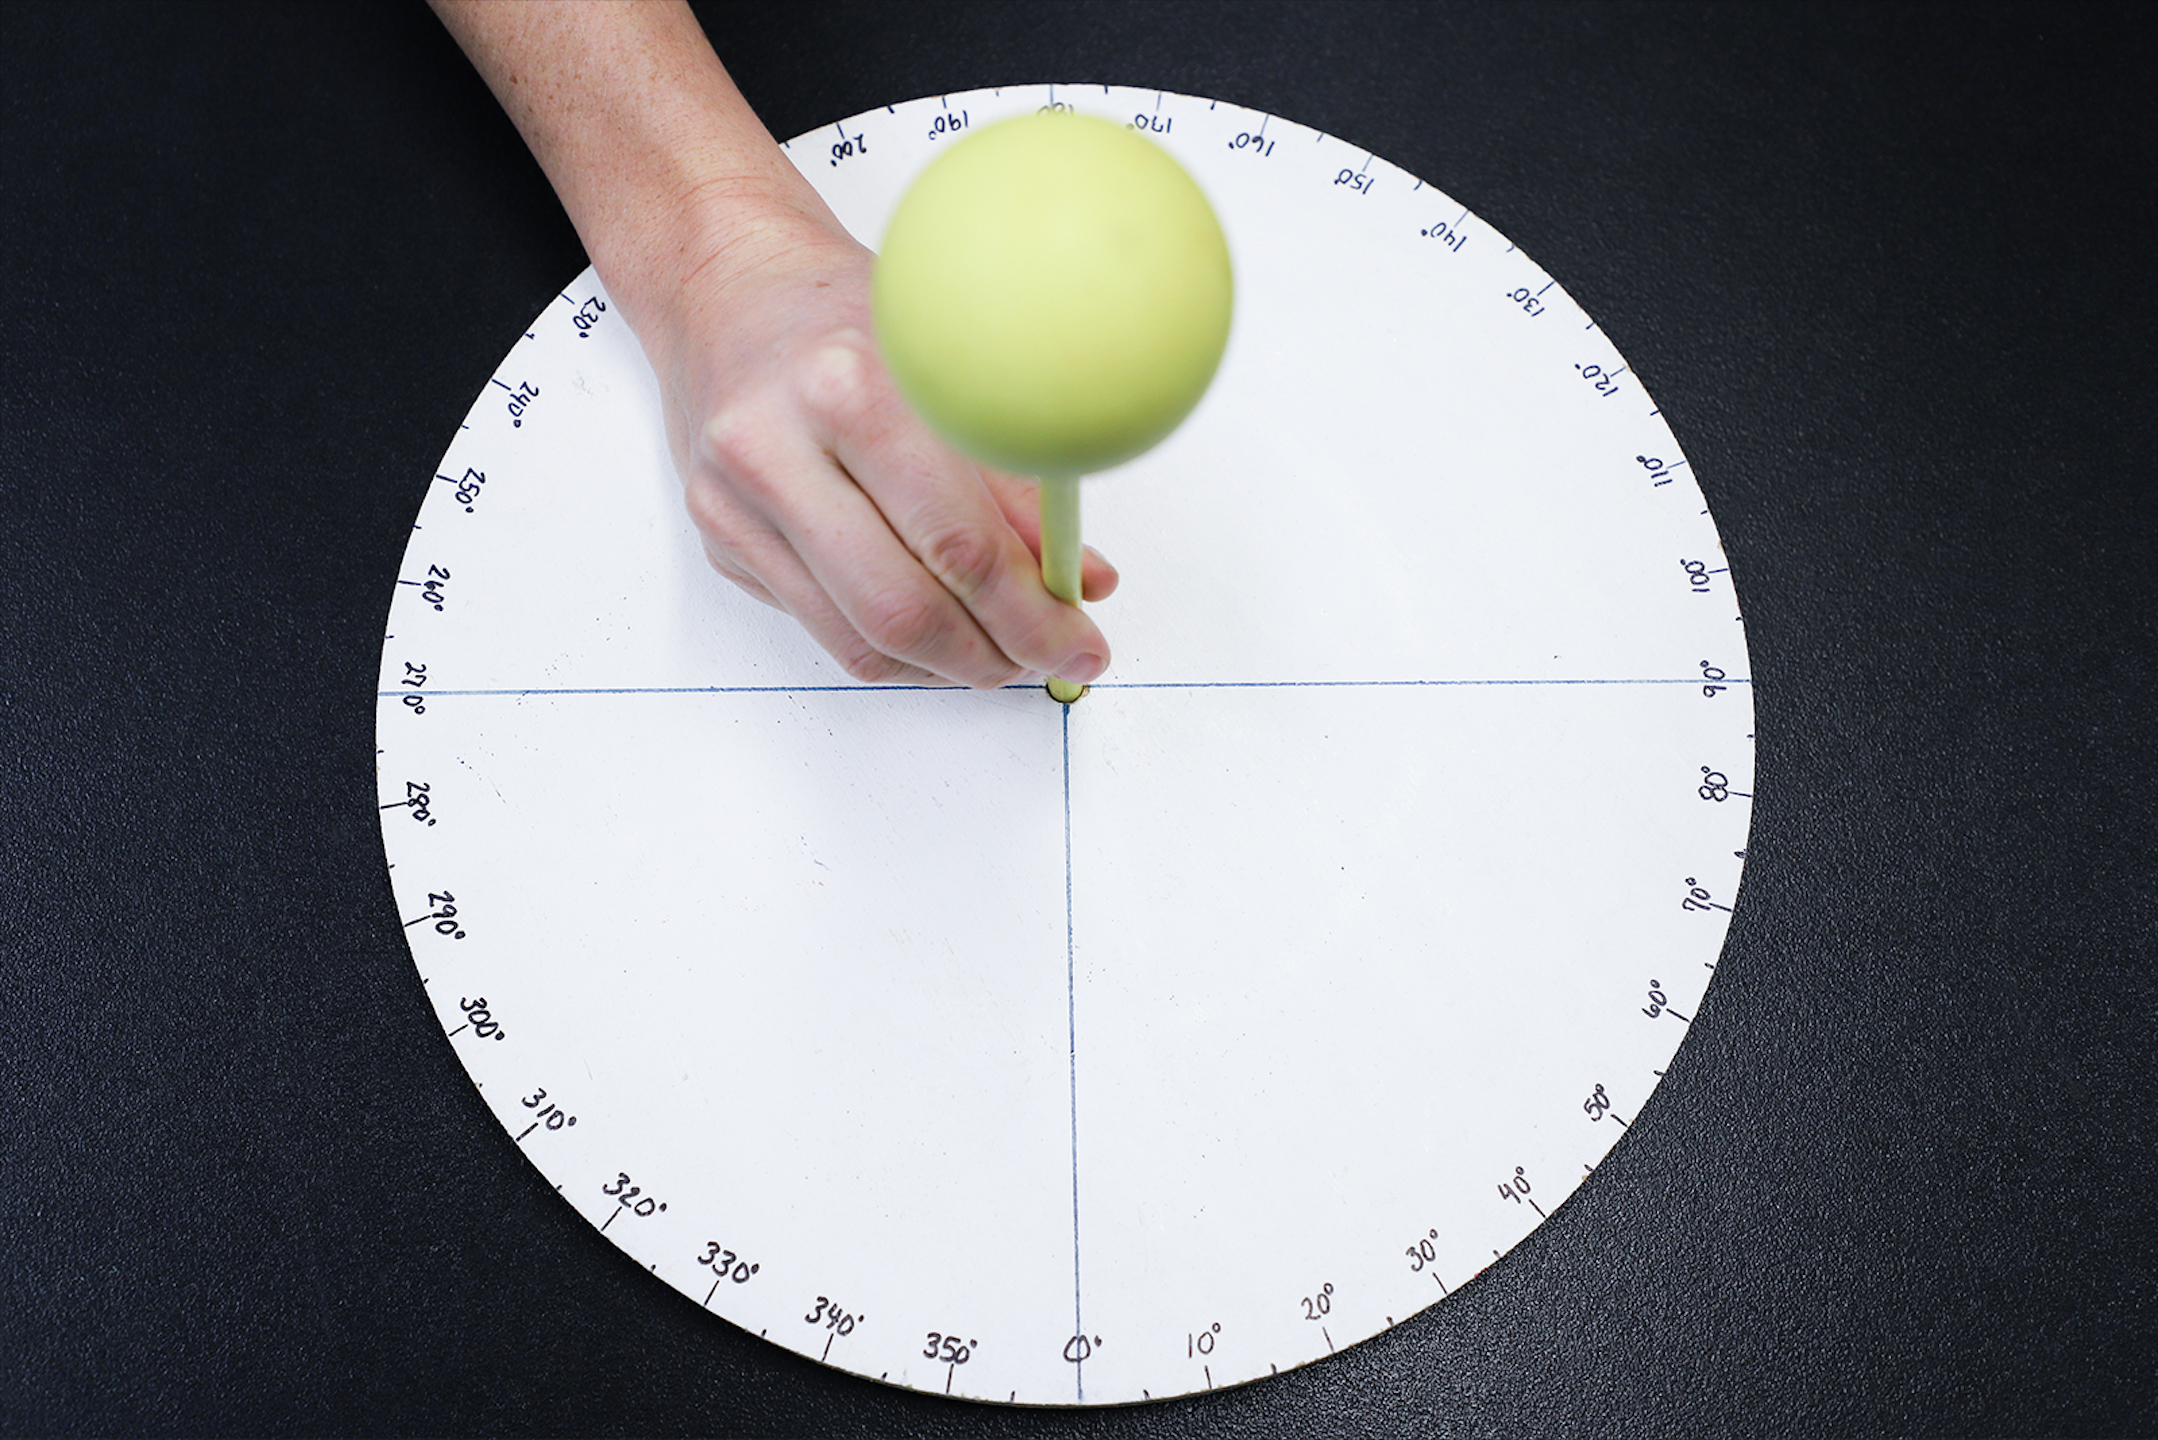 Hand placing the model sun in the center of the scale